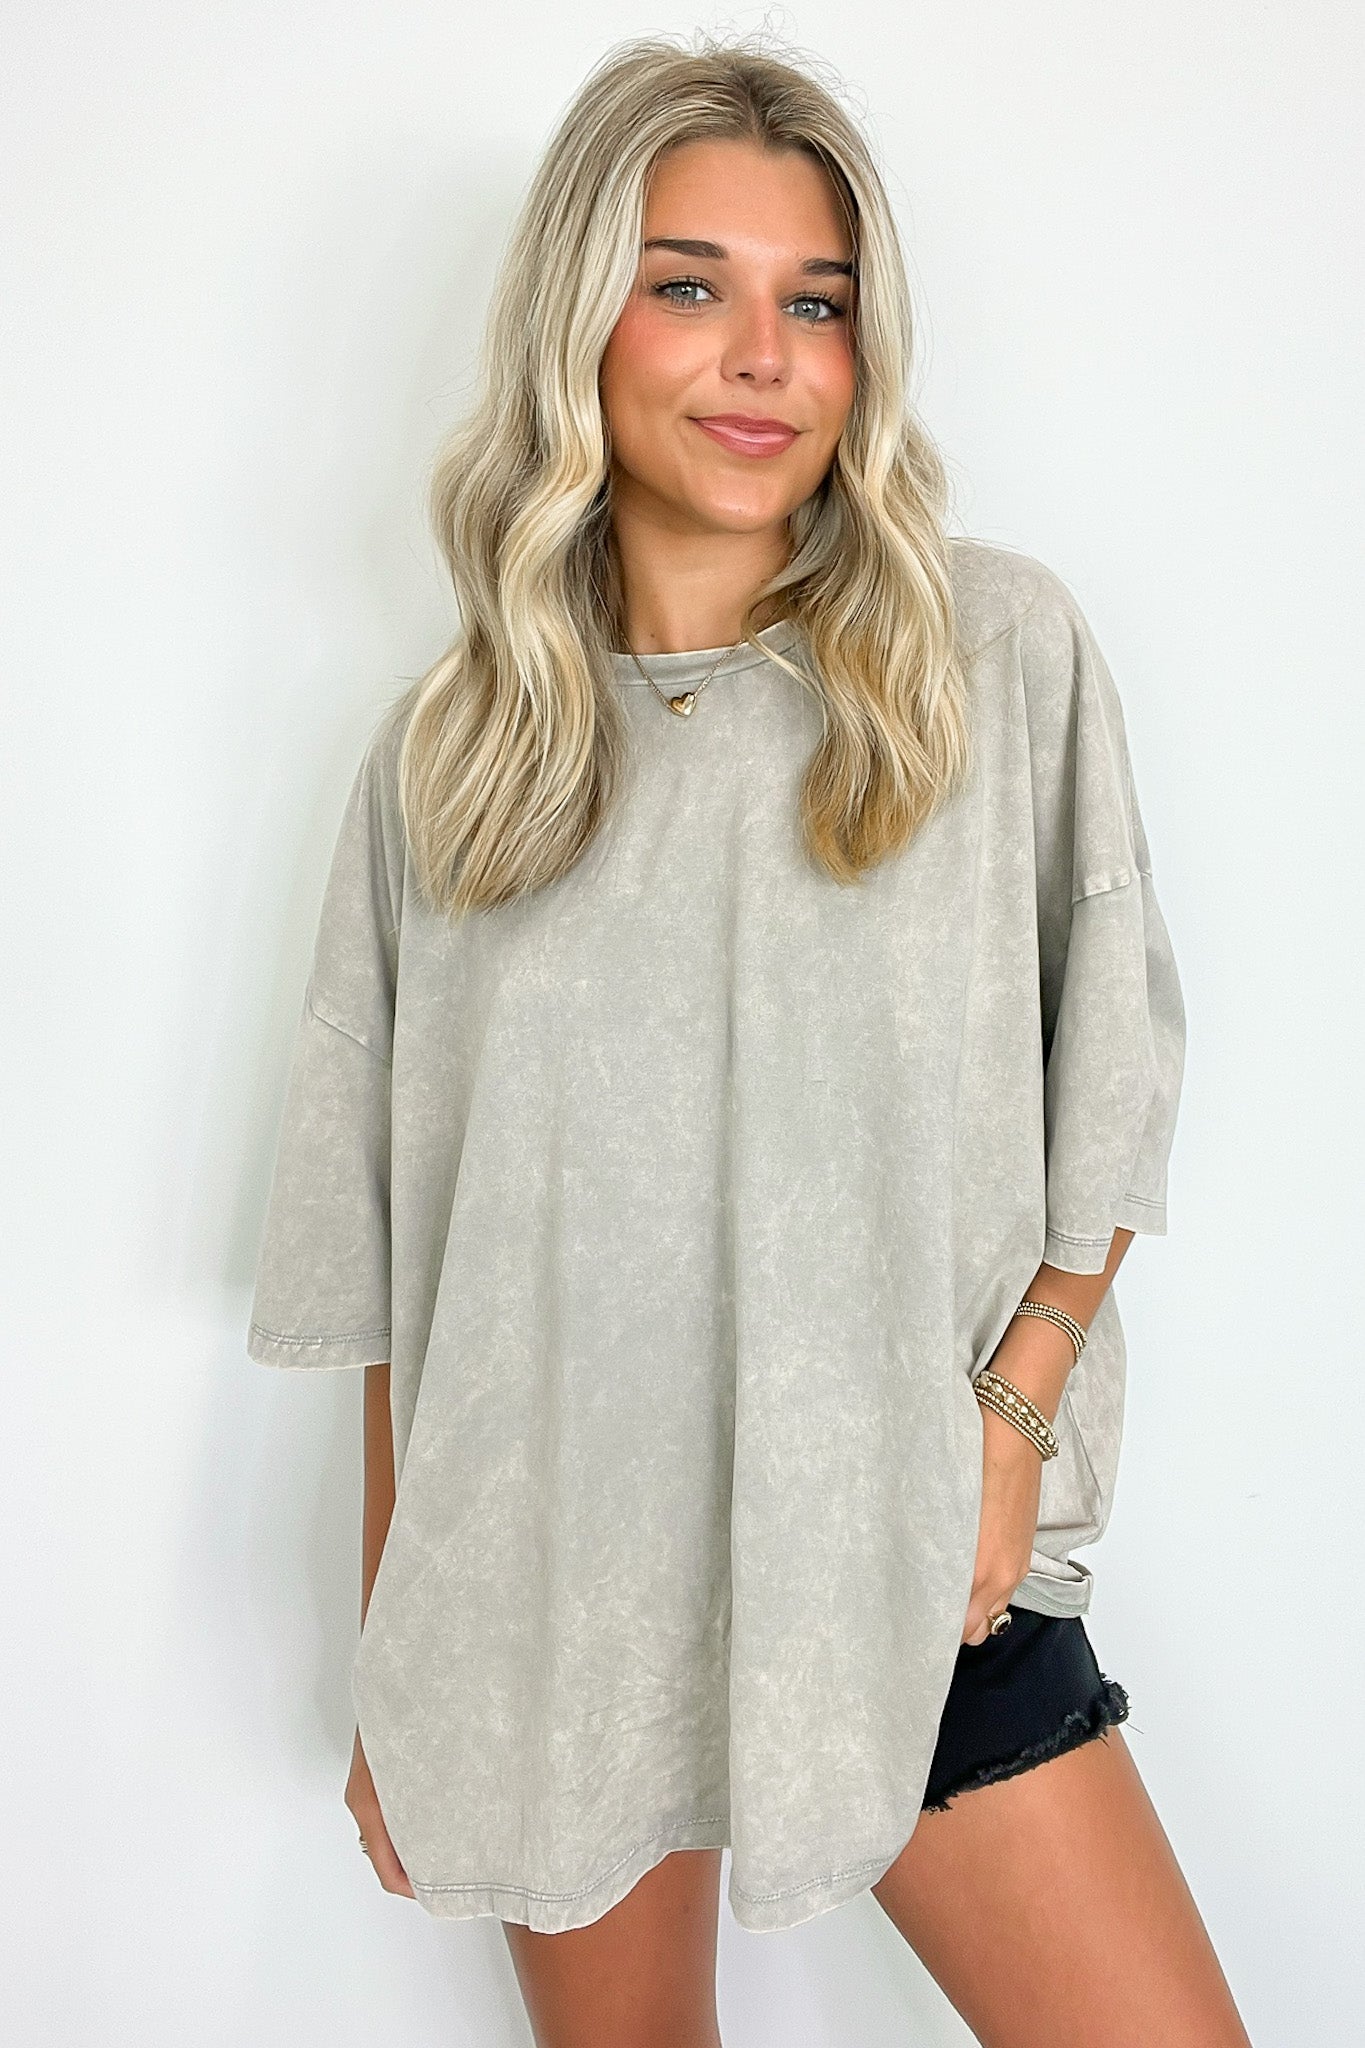 Sleet / SM Weekend Awaits Mineral Wash Oversized Top - BACK IN STOCK - Madison and Mallory